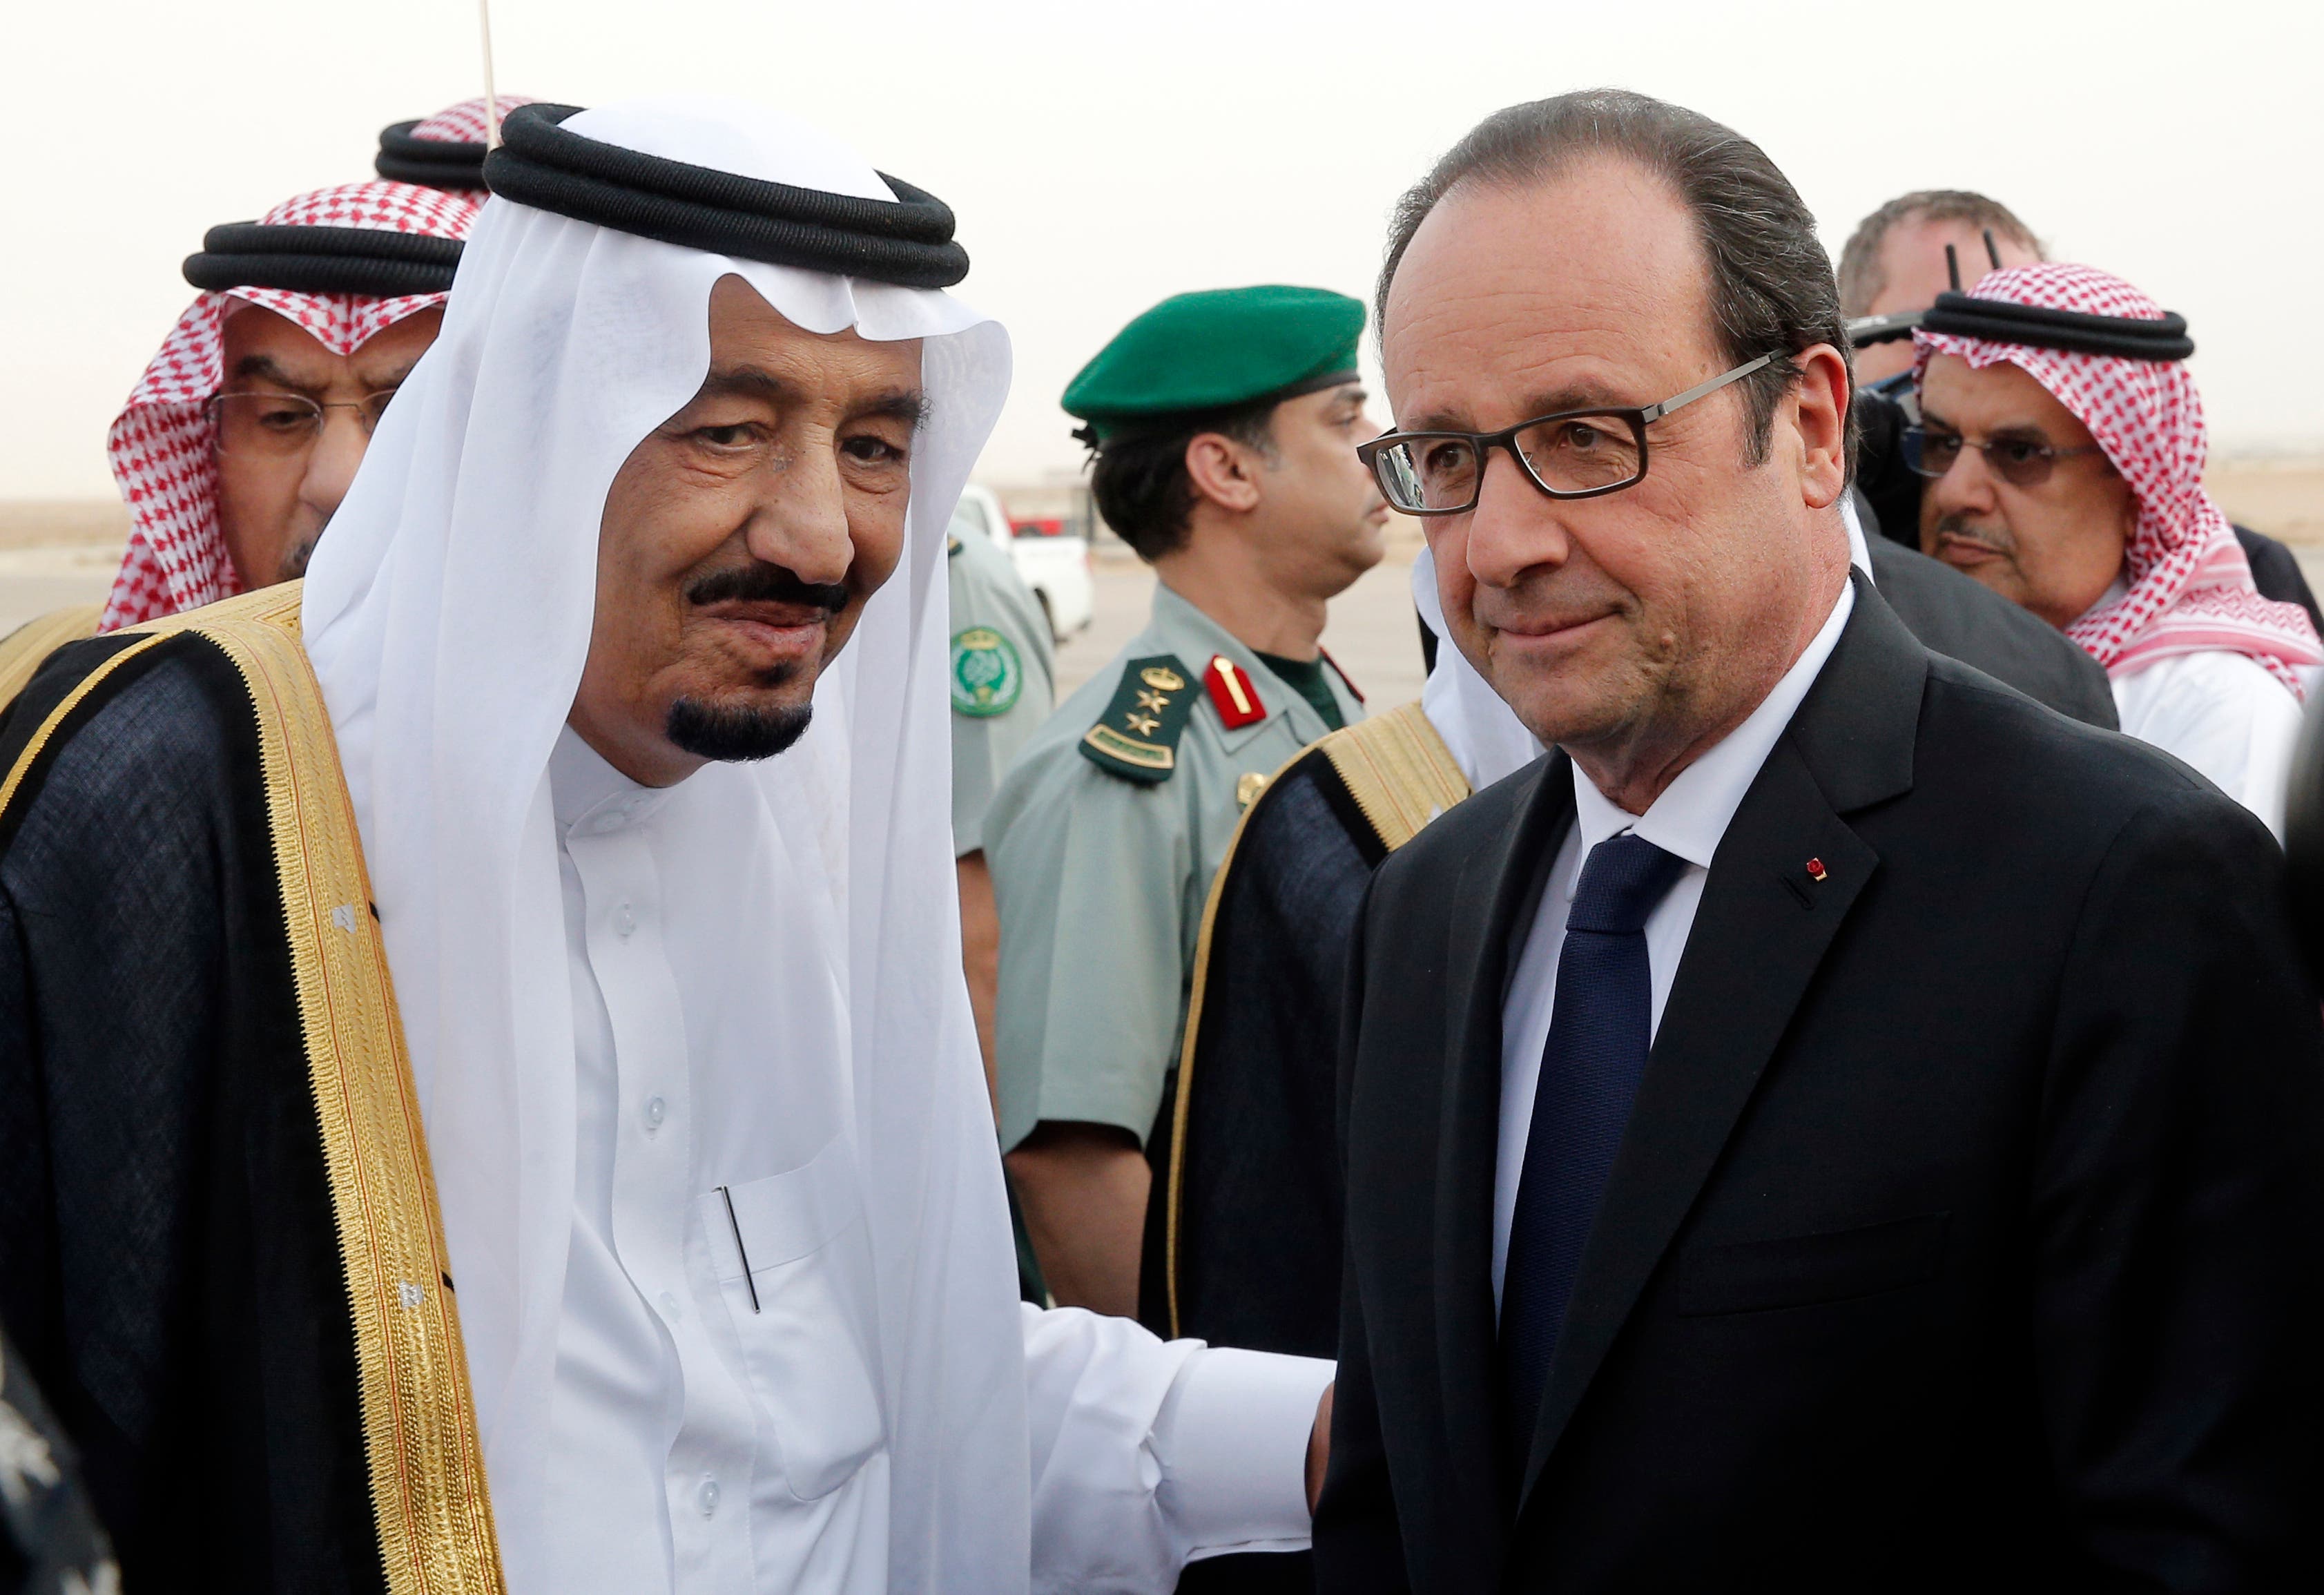  French President Francois Hollande, right, is greeted by Saudi Arabia’s King Salman upon his arrival at Riyadh airport, Saudi Arabia, Monday, May 4, 2015. Hollande is the guest of honor of the Gulf cooperation council summit in Riyadh, where security issues in the region are going to be discussed. (AP Photo/Christophe Ena, Pool)